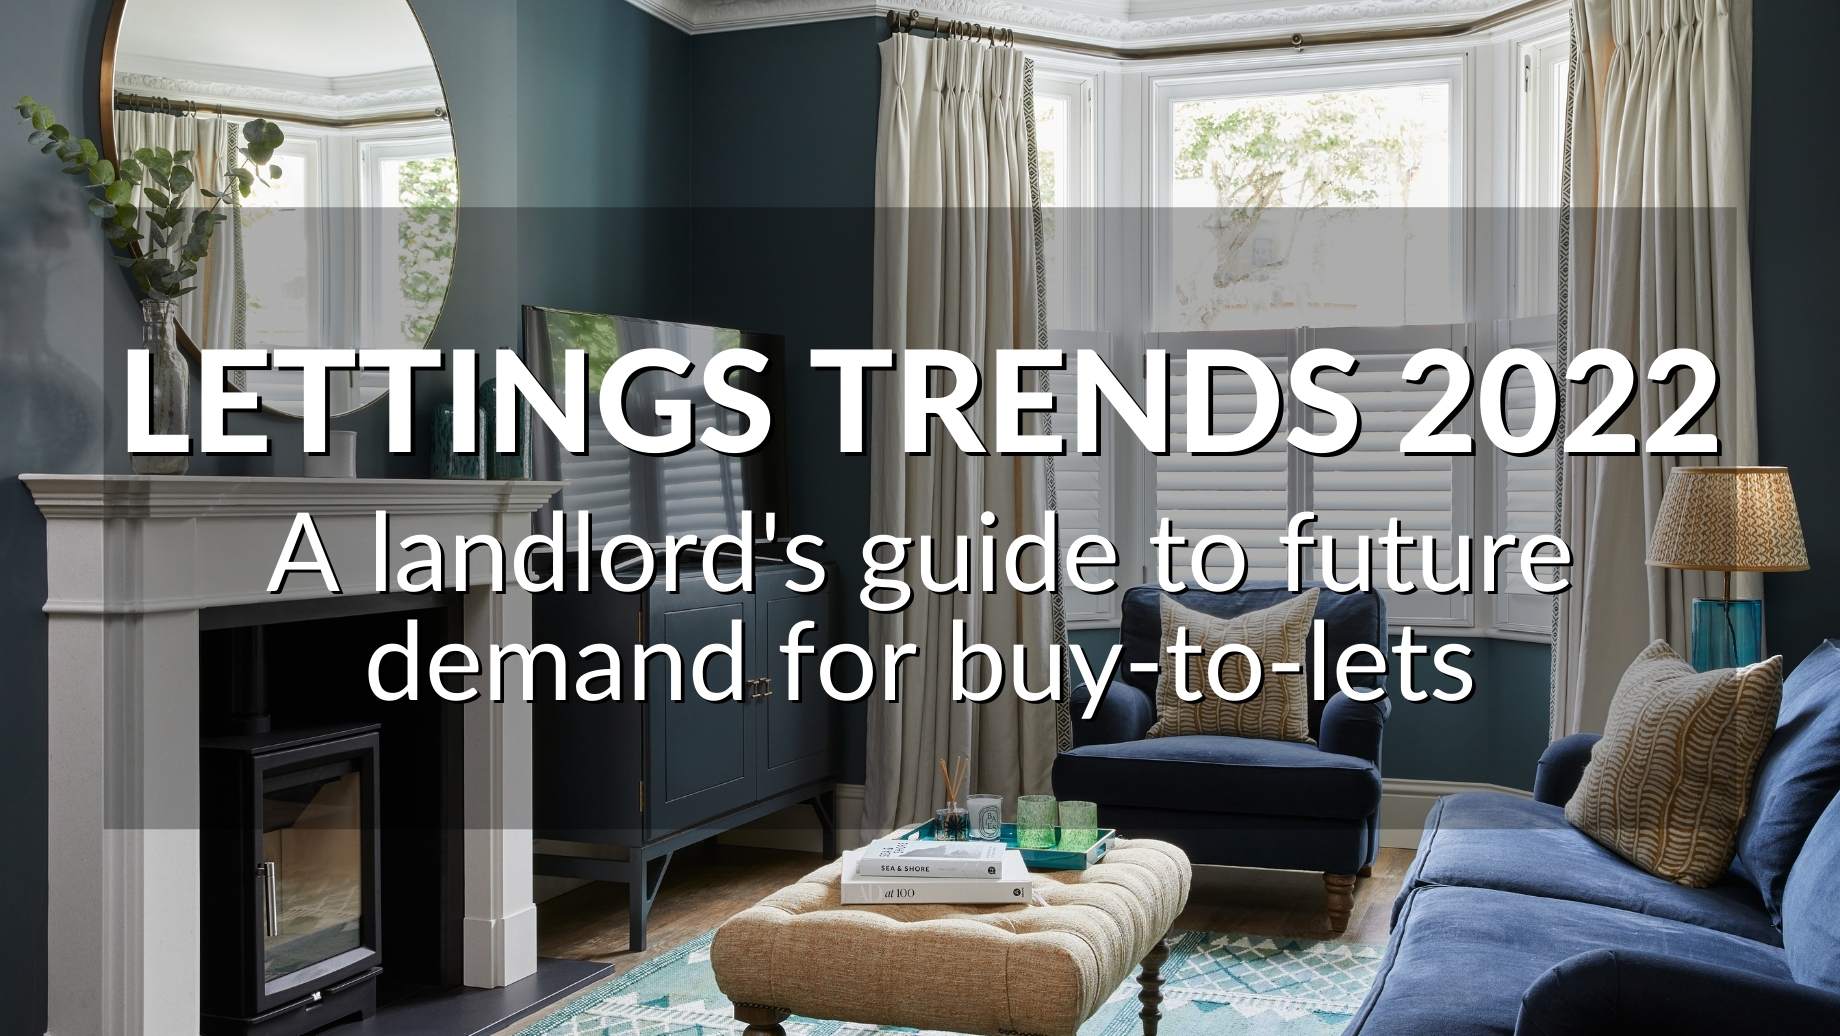 Lettings Trends 2022: A Landlord's guide to future